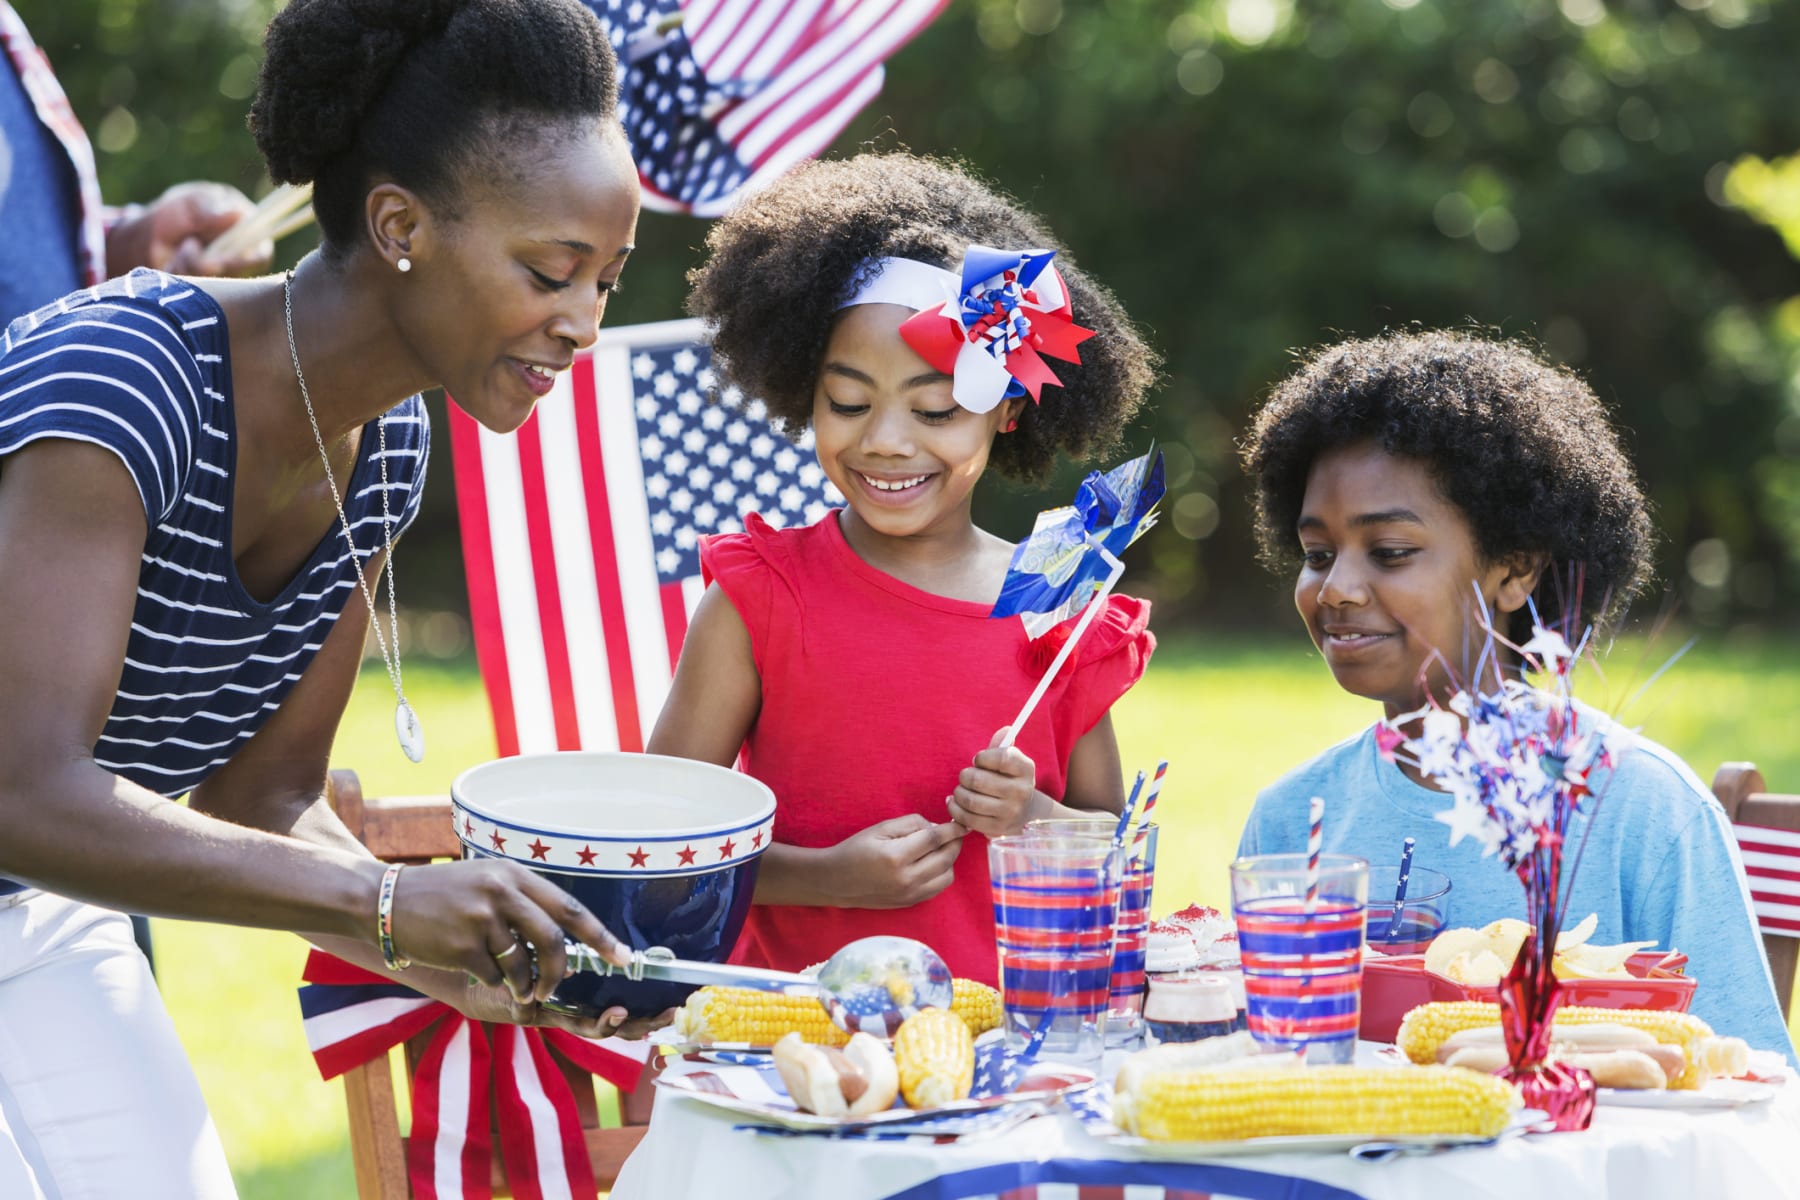 Woman and children attending a national holiday picnic.